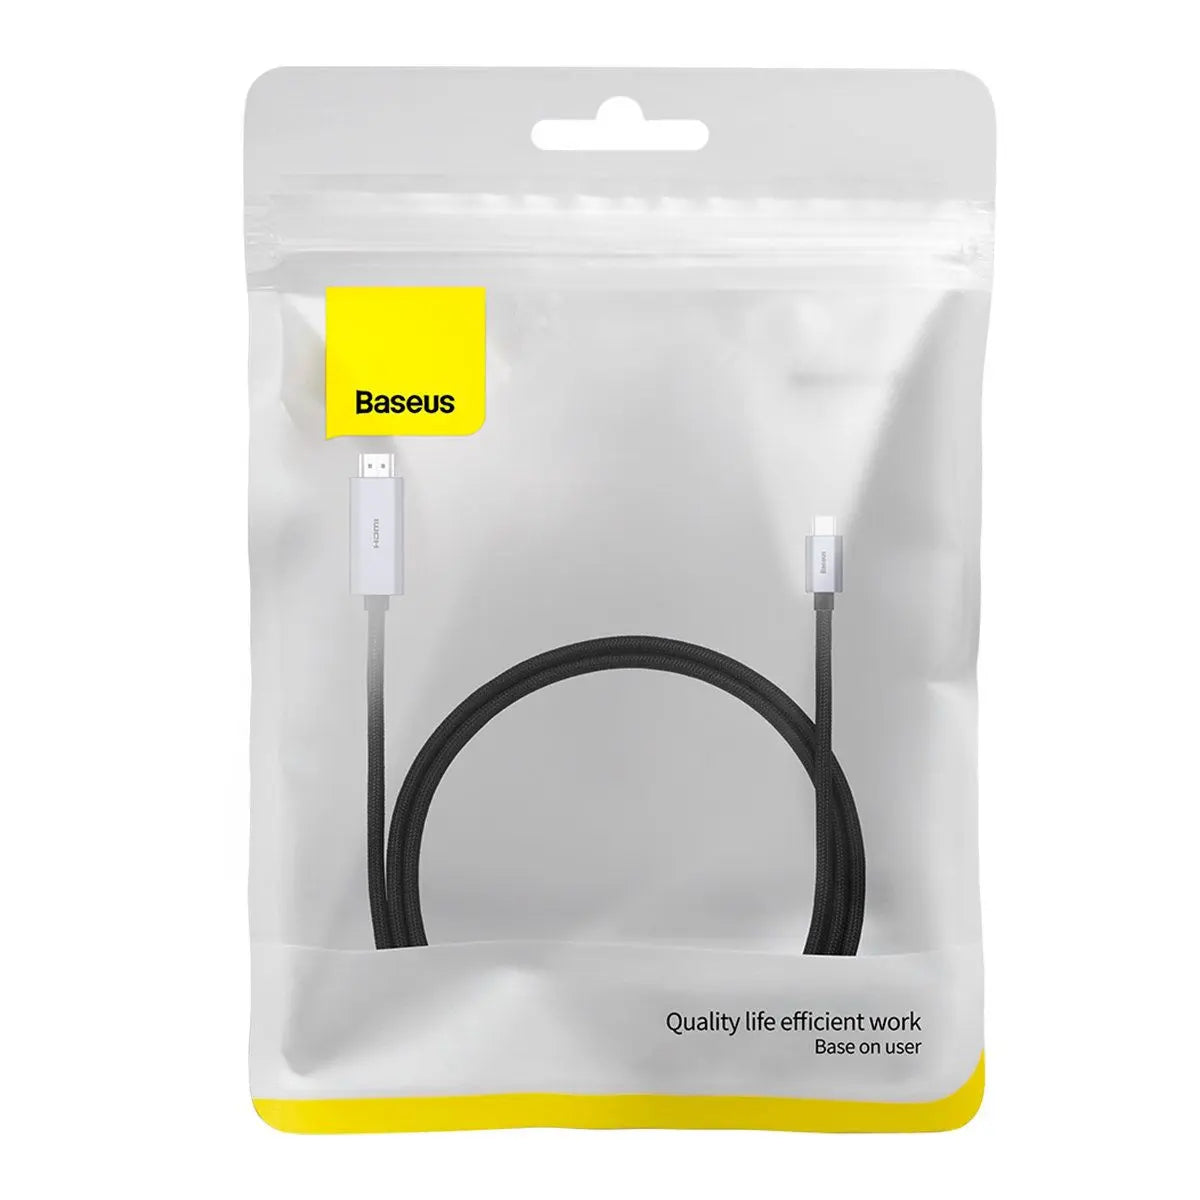 Baseus Type-C to HDMI 4K Adapter Cable High Definition Series Graphene 1m Black